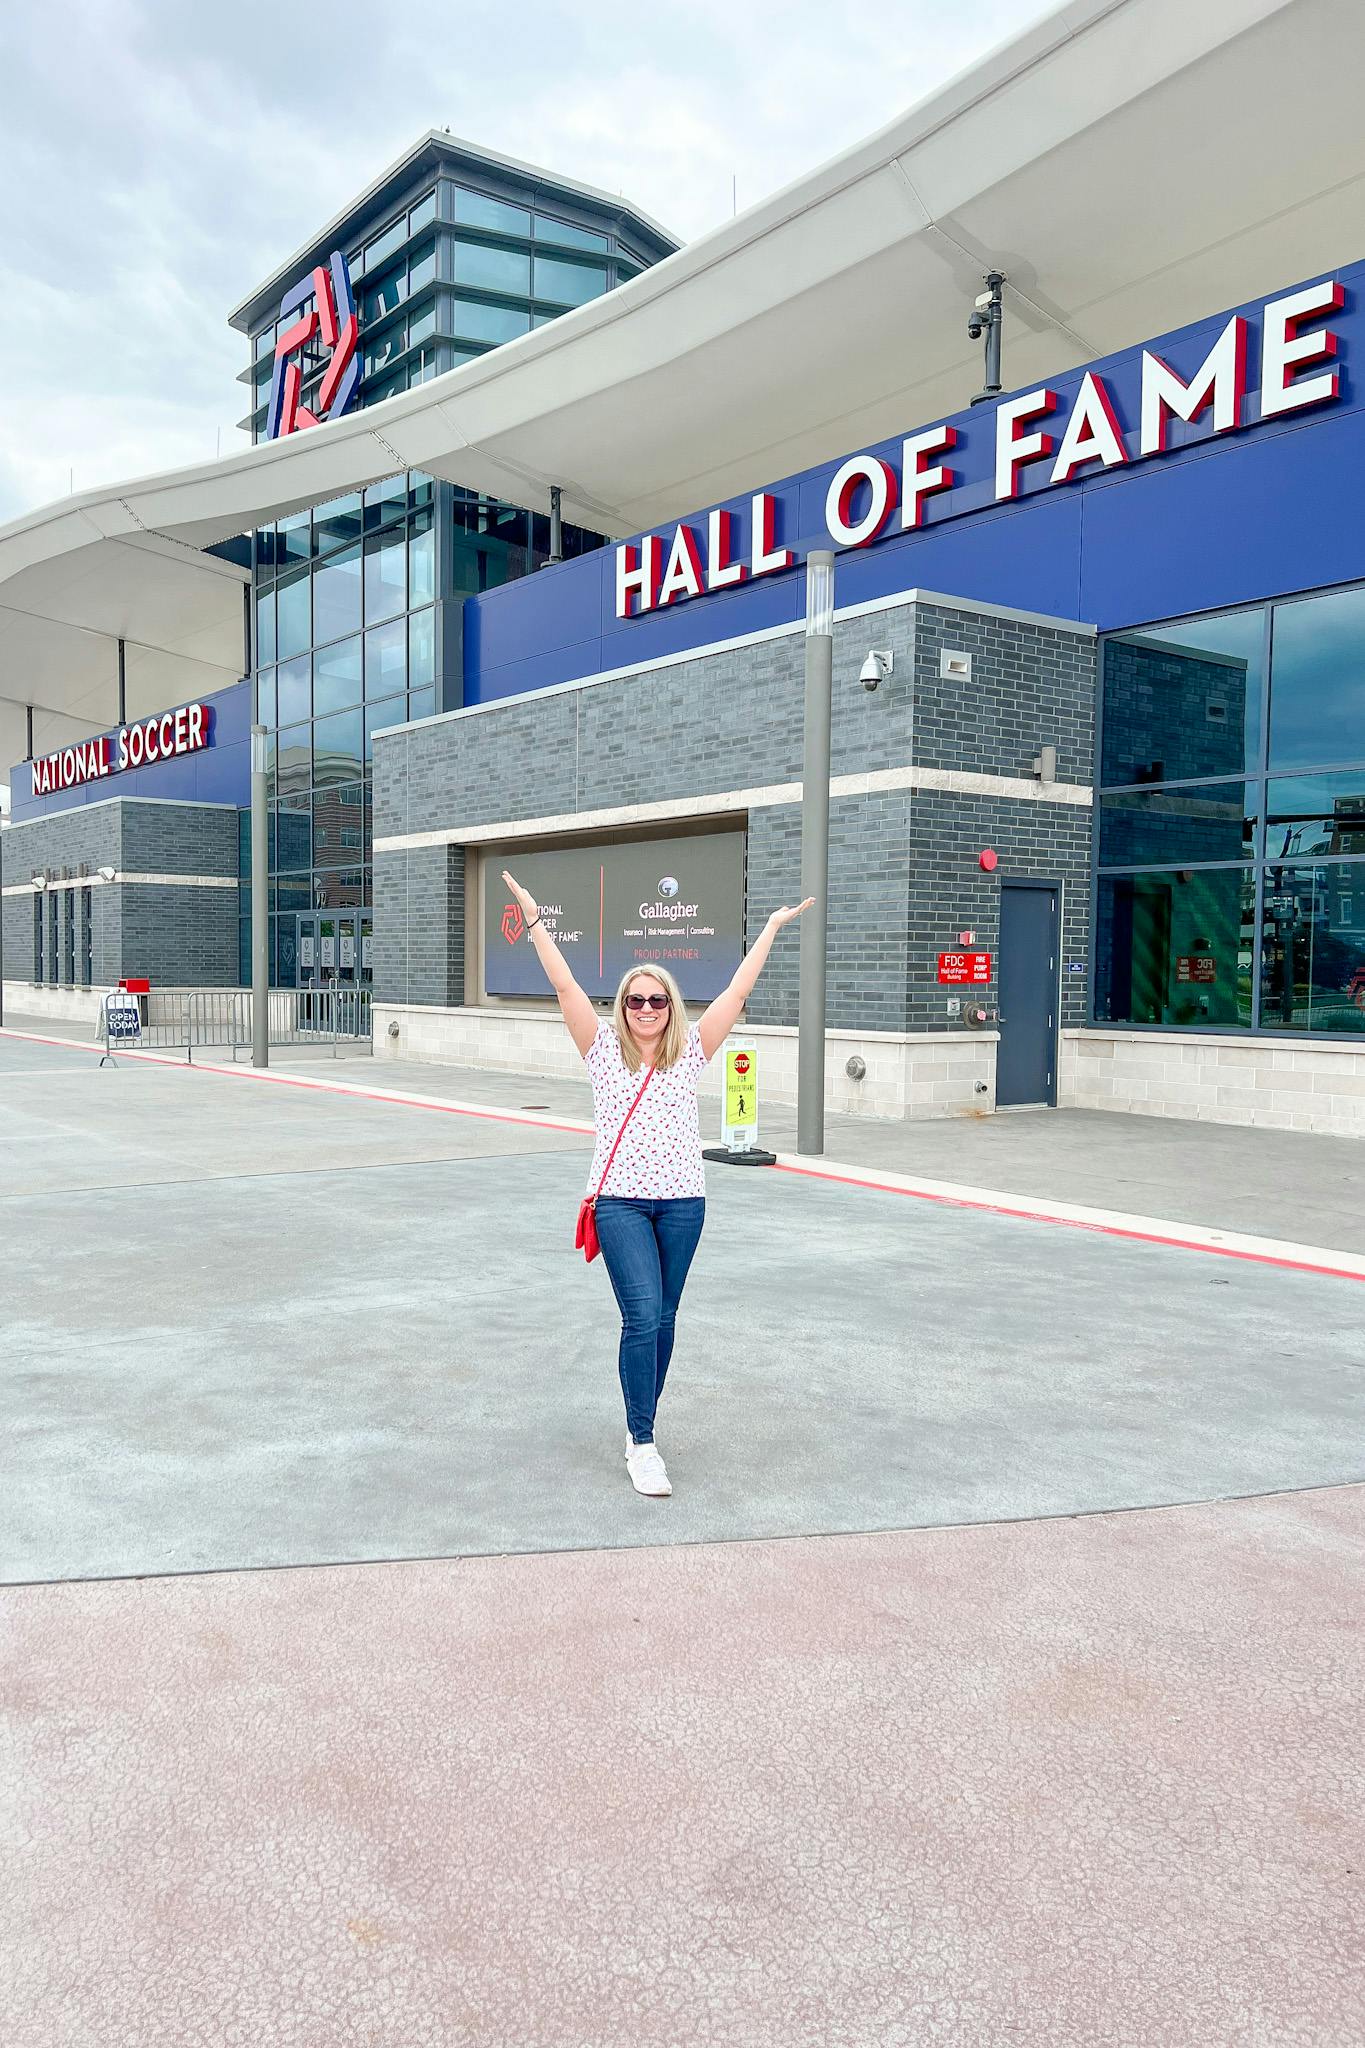 The Soccer Mom poses in front of the Soccer Hall of Fame.